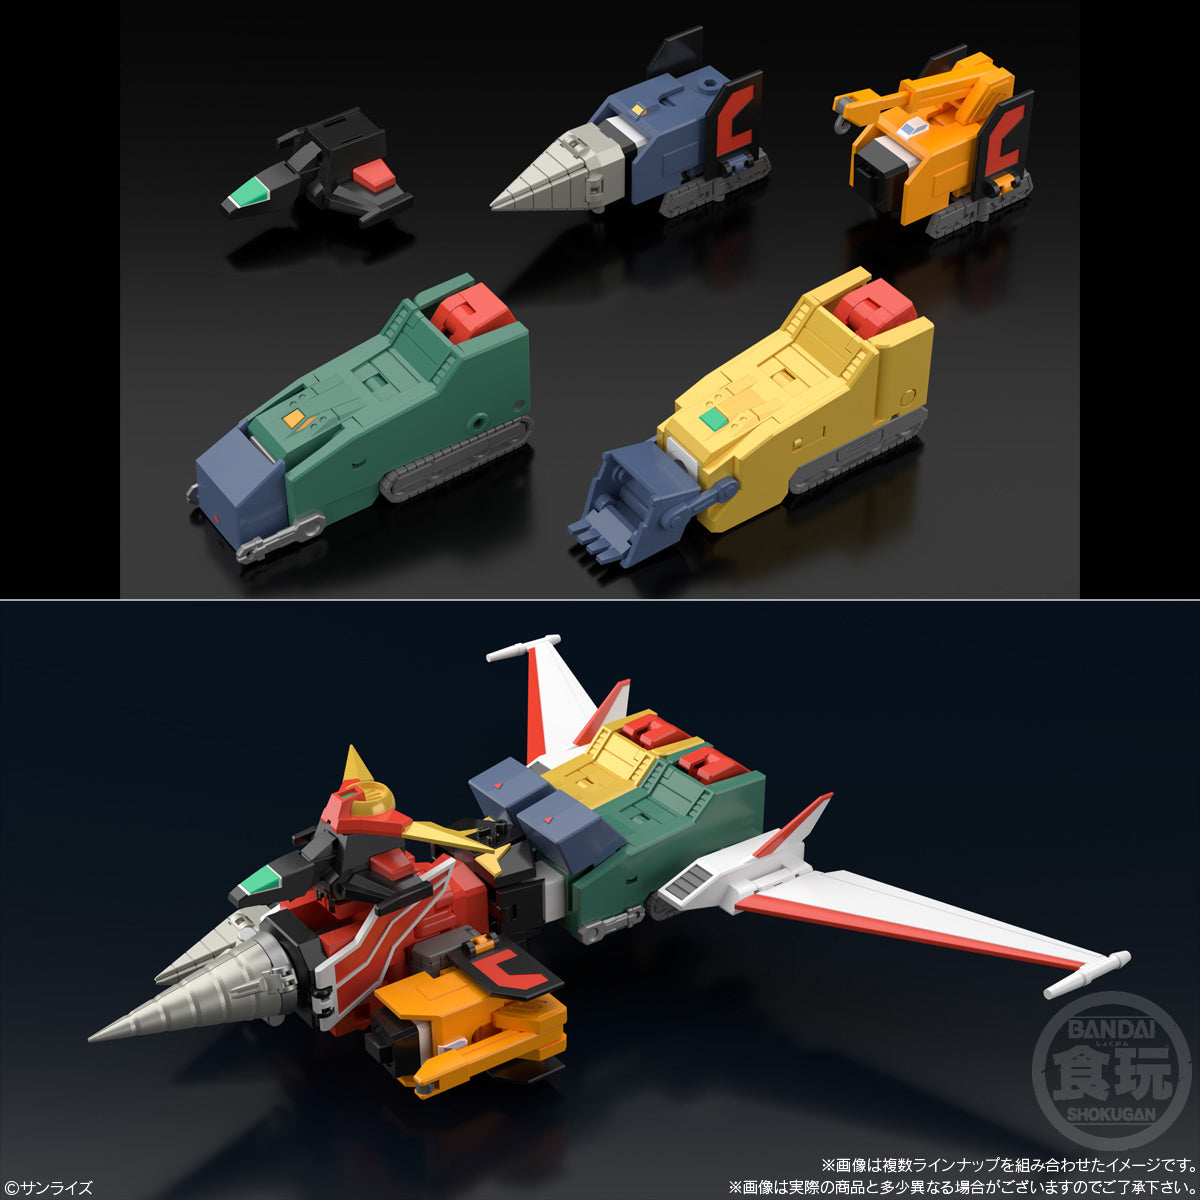 SMP The Brave Express Might Gaine 2 Model Kit (3 Pack Box)